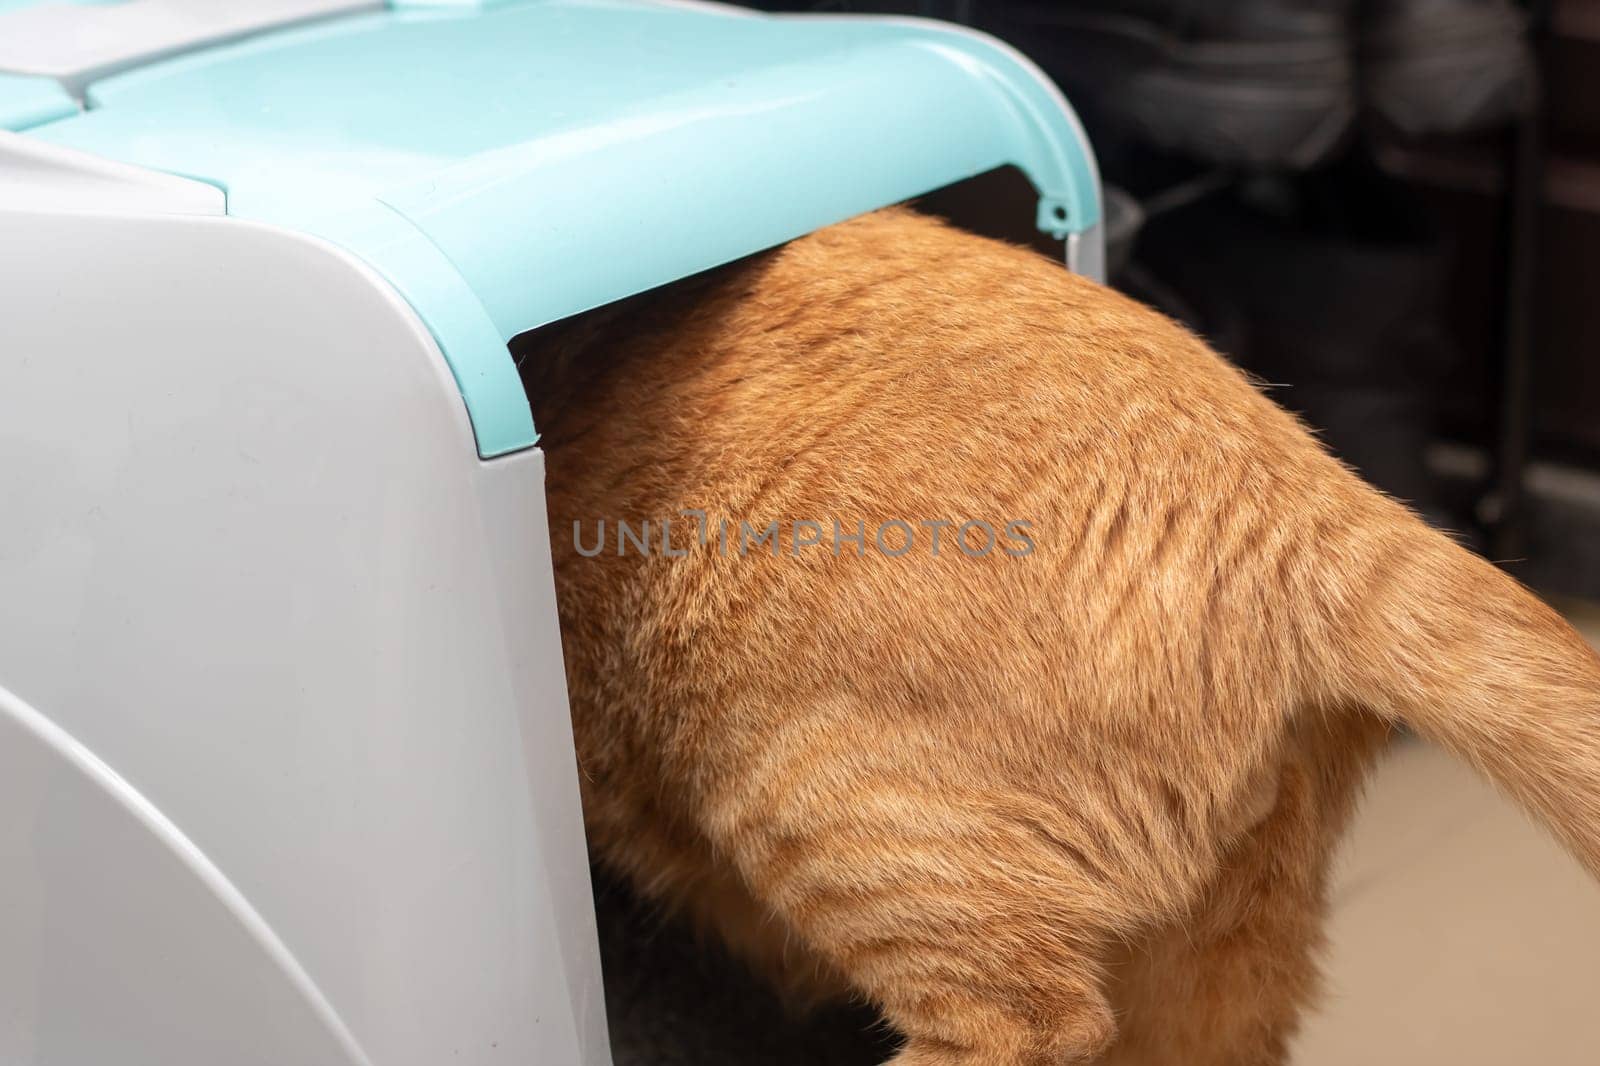 Ginger cat enters a closed litter box by Vera1703